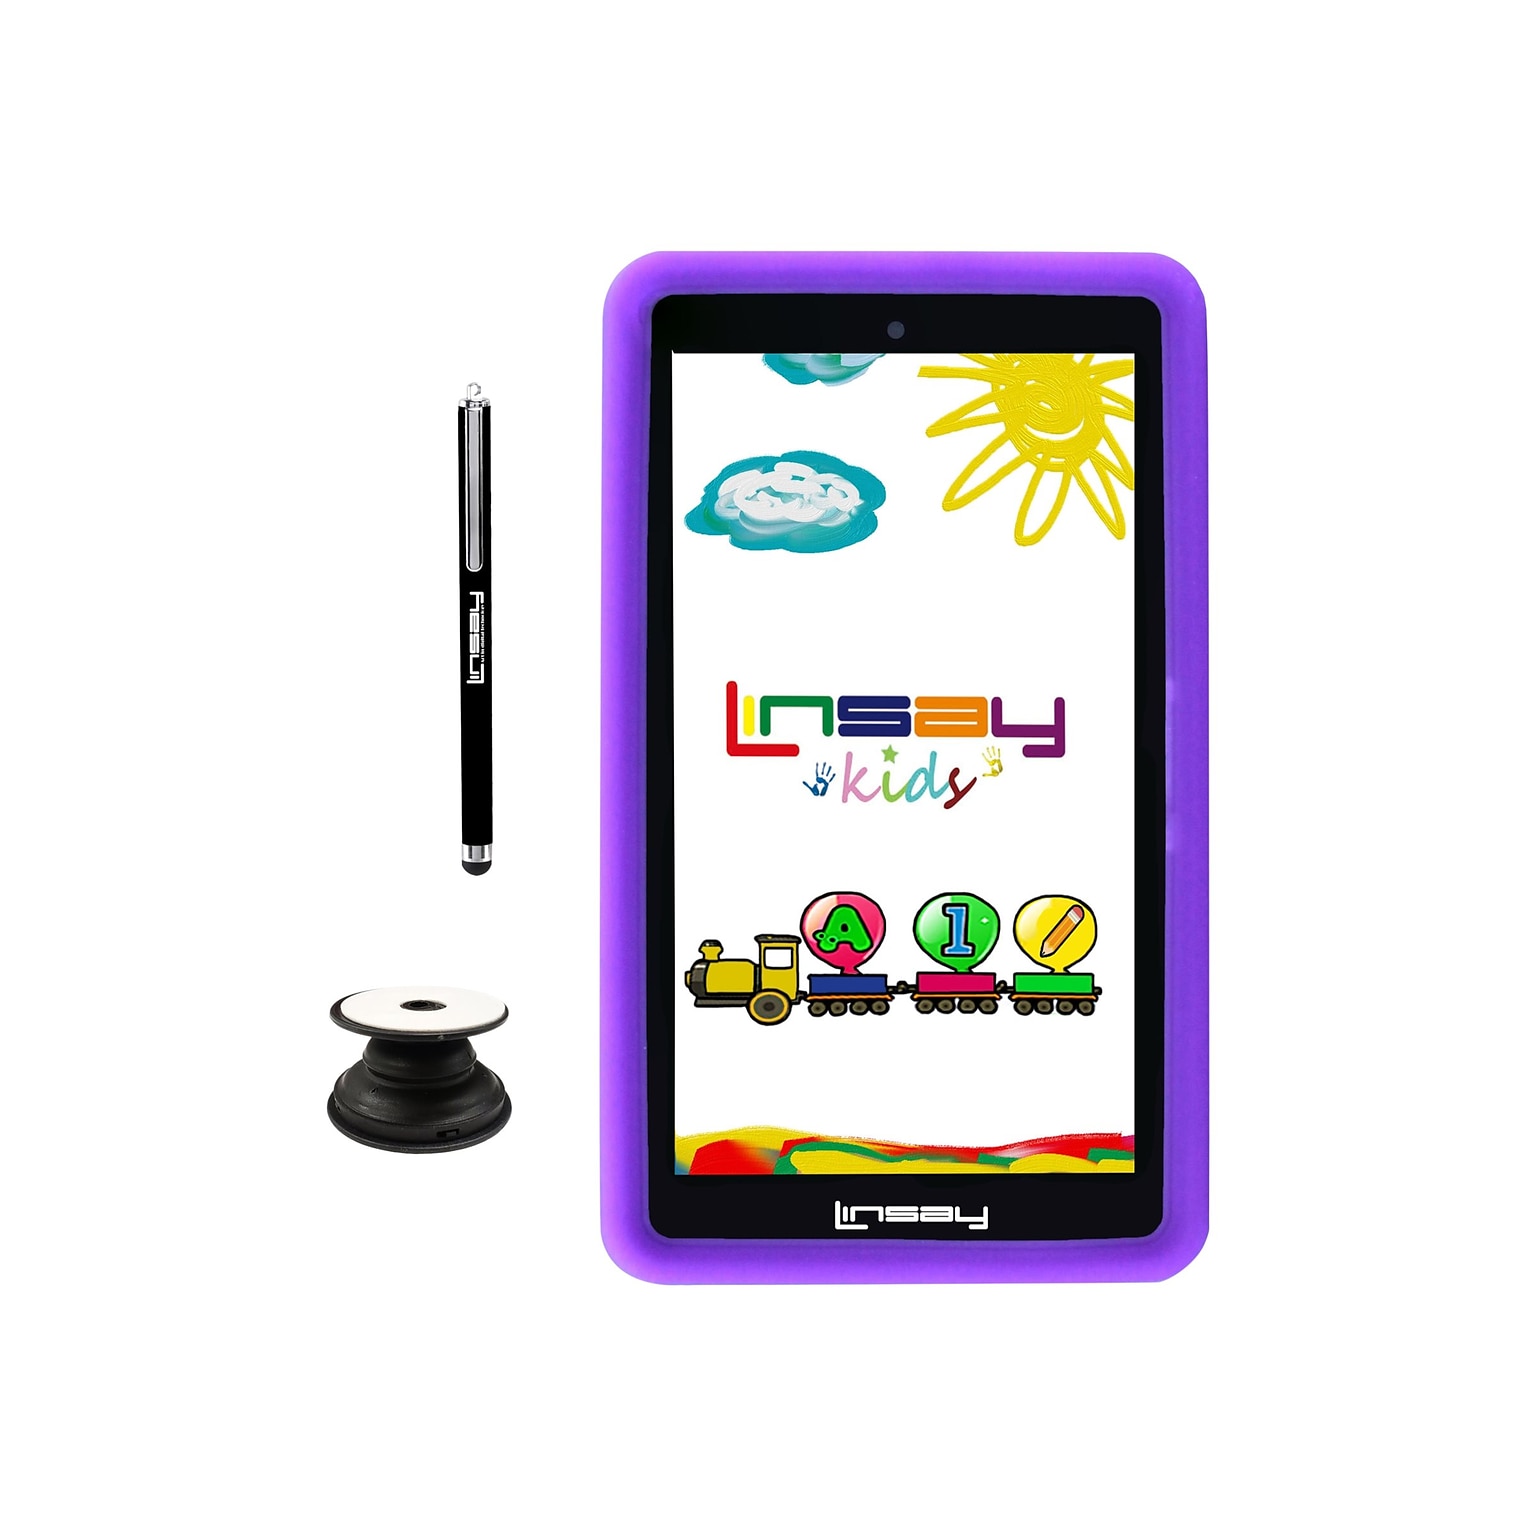 Linsay 7 Tablet with Holder, Pen, and Case, WiFi, 2GB RAM, 64GB Storage, Android 13, Purple/Black (F7UHDKIDSPURPLEP)